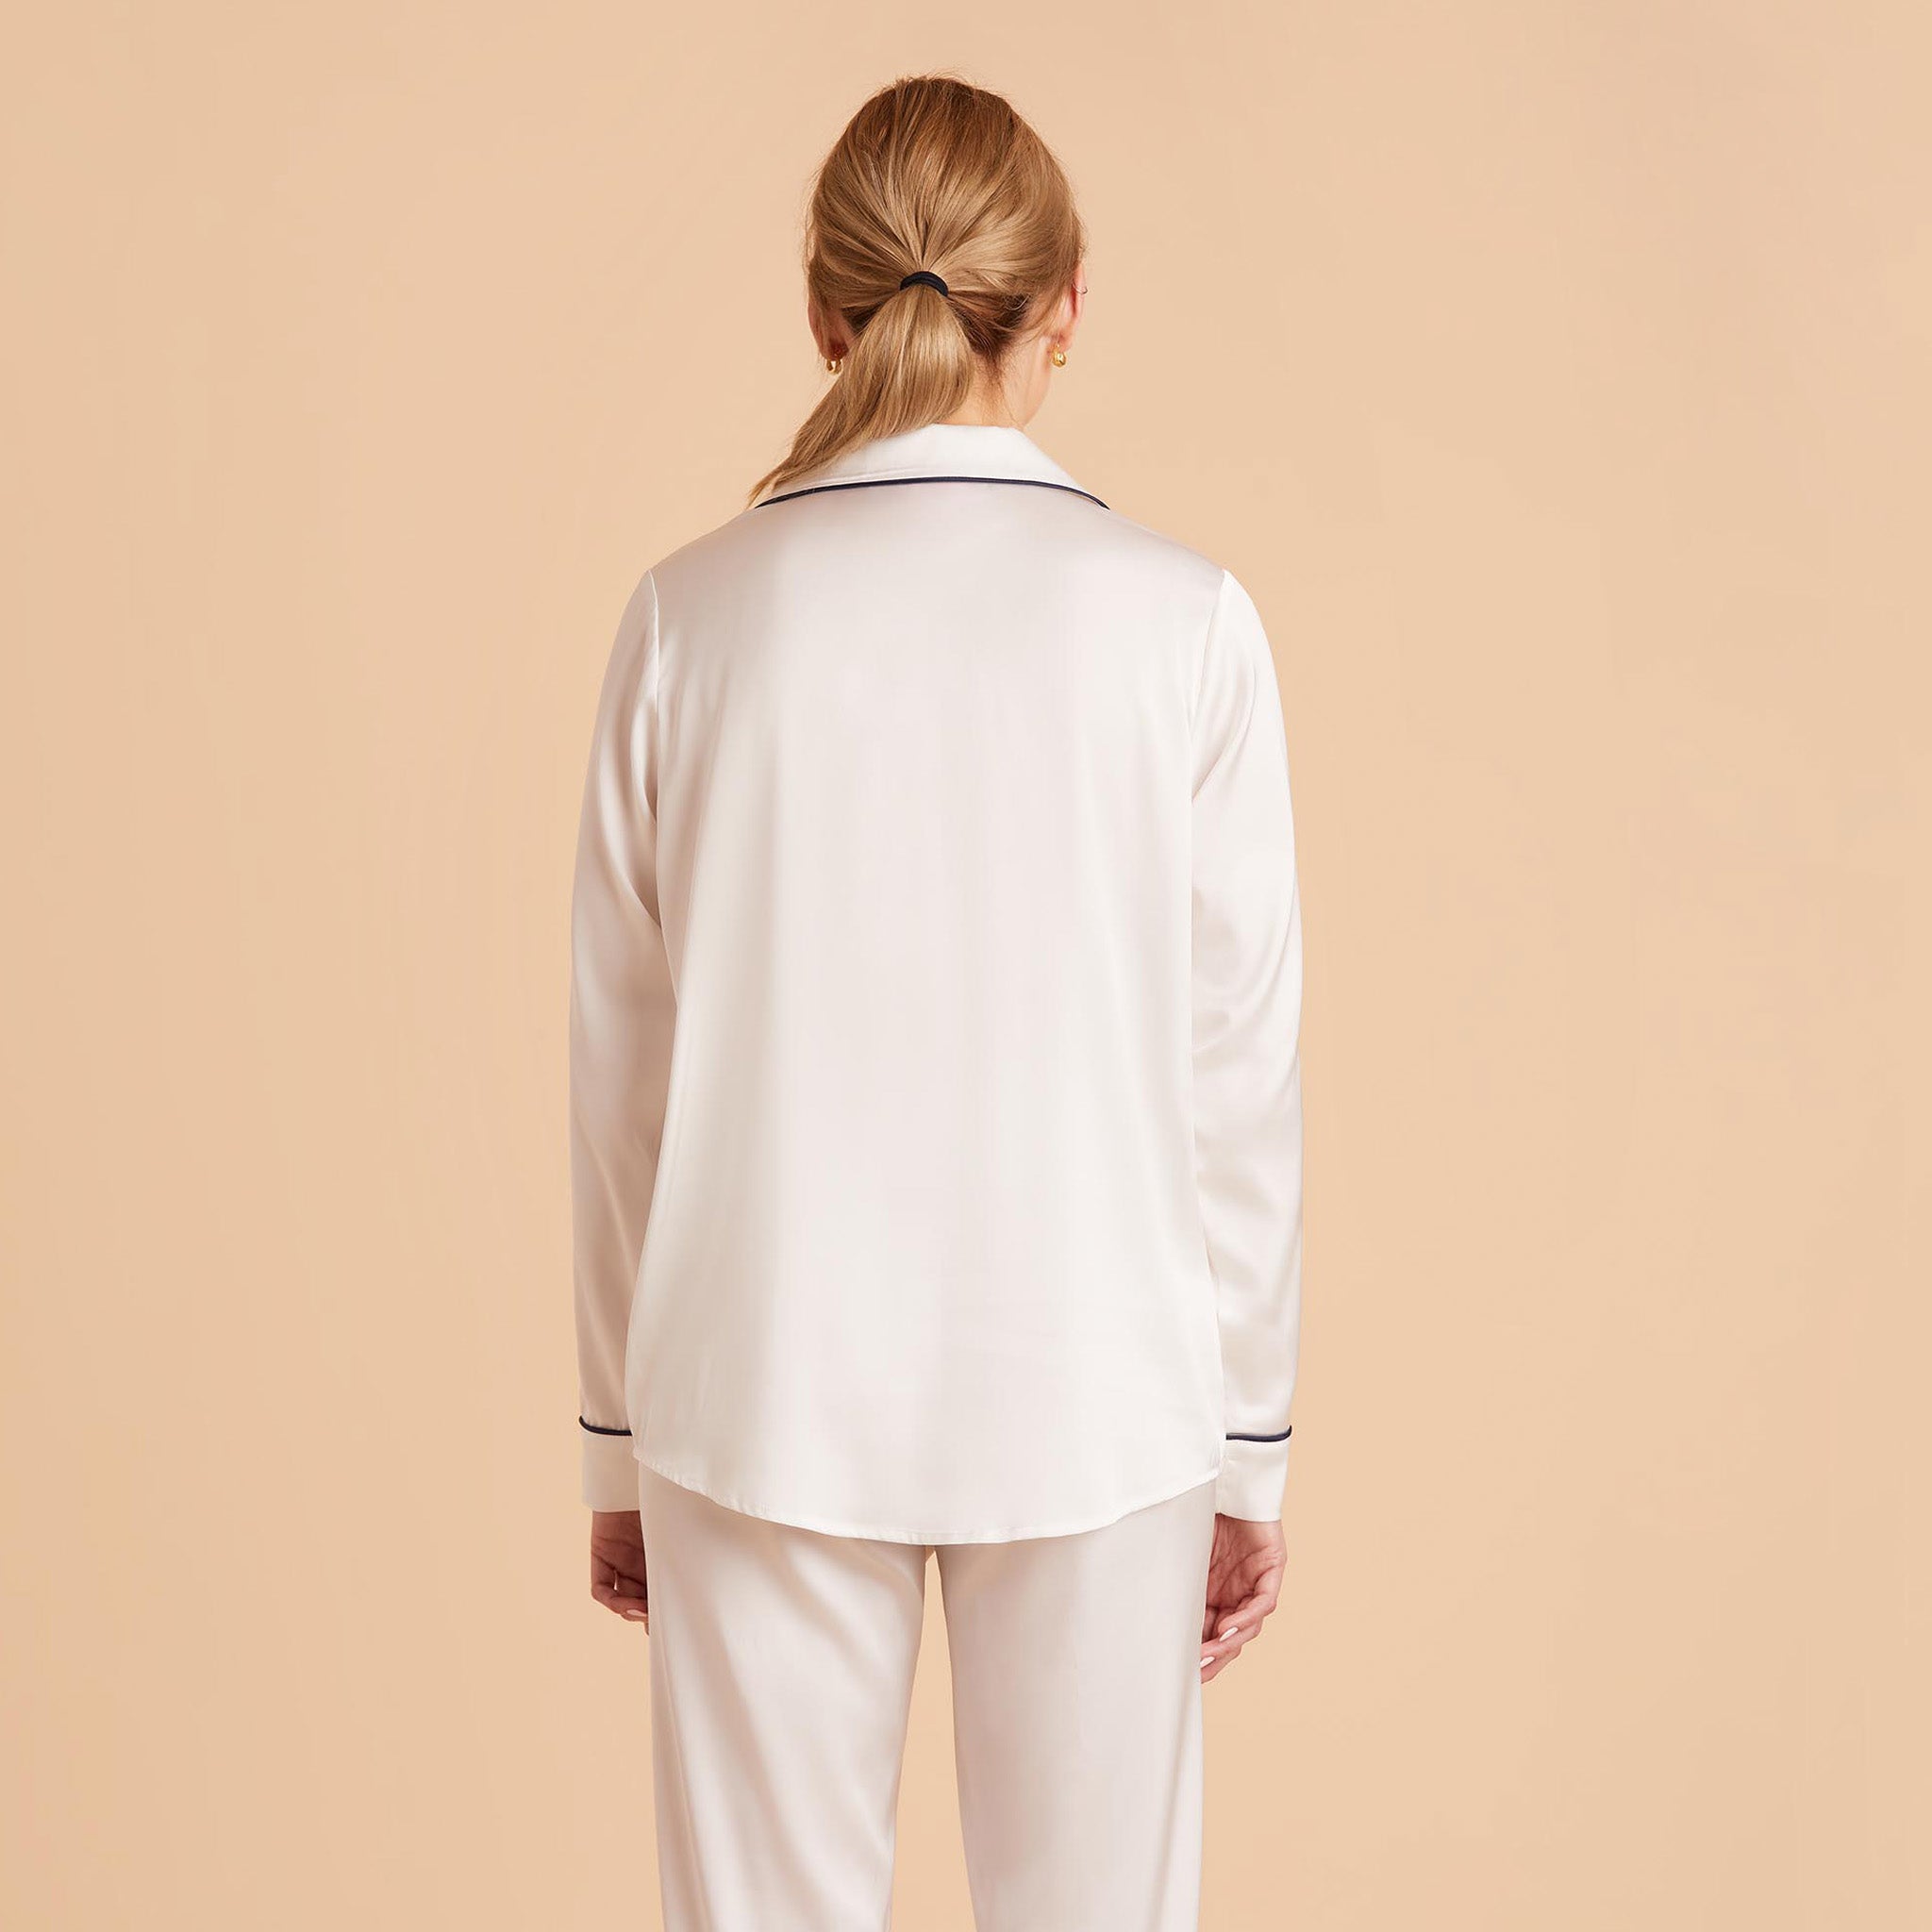 Jonny Satin Long Sleeve Pajama Top With White Piping in ivory, back view